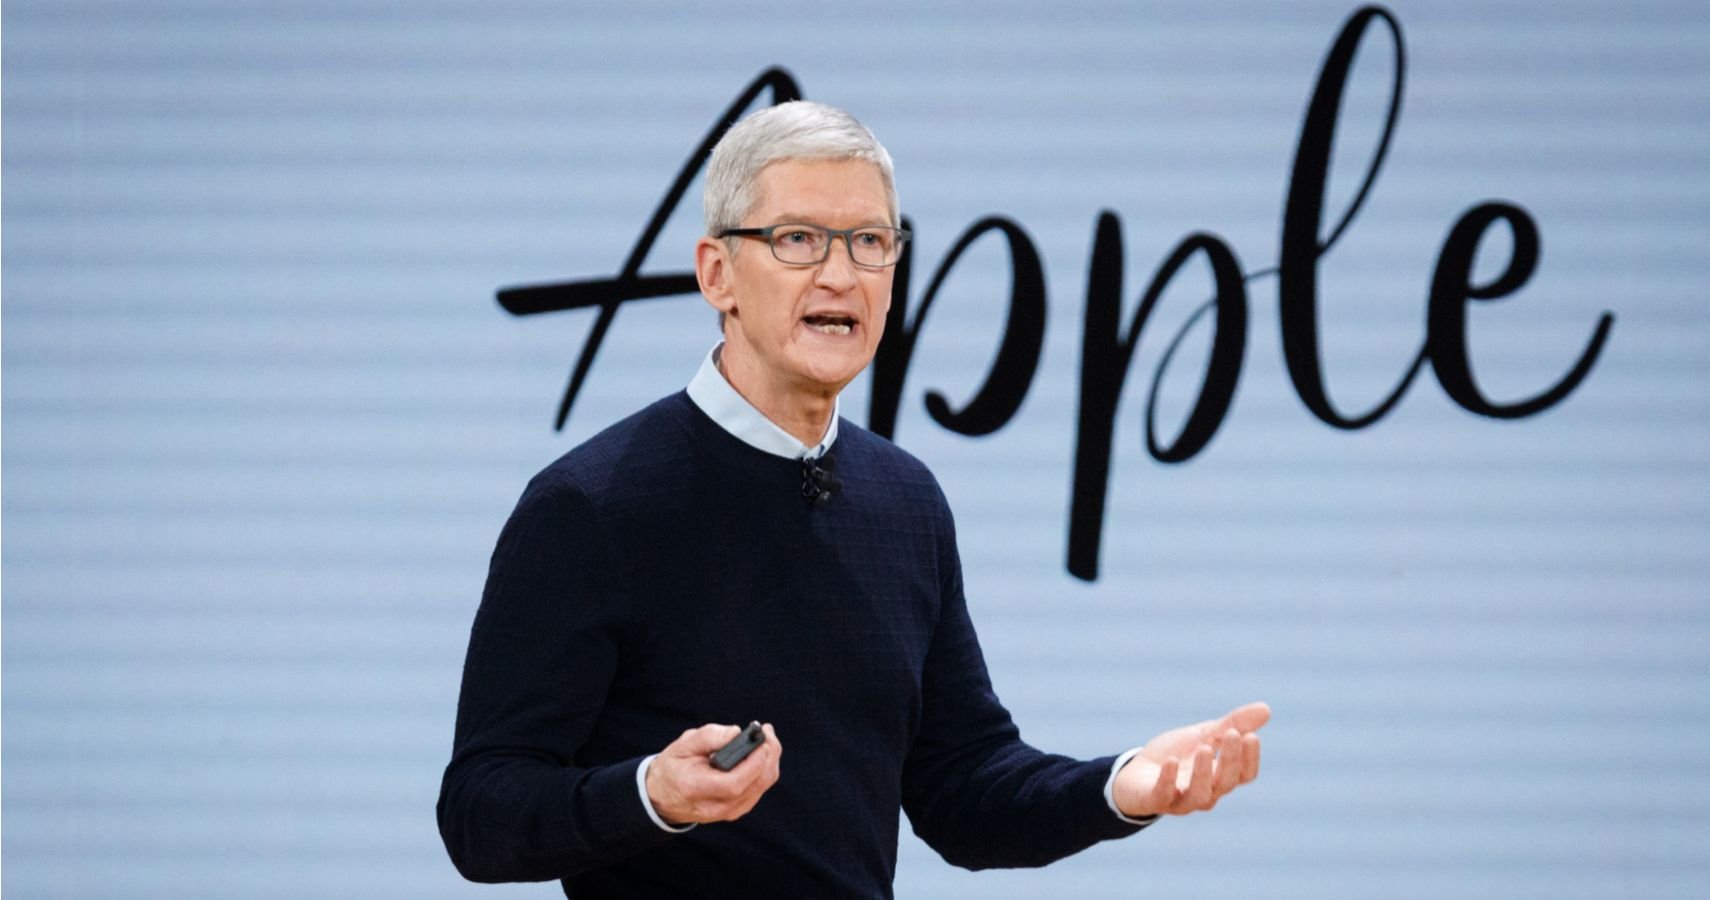 From Student To CEO: The Rise Of Apple's Tim Cook